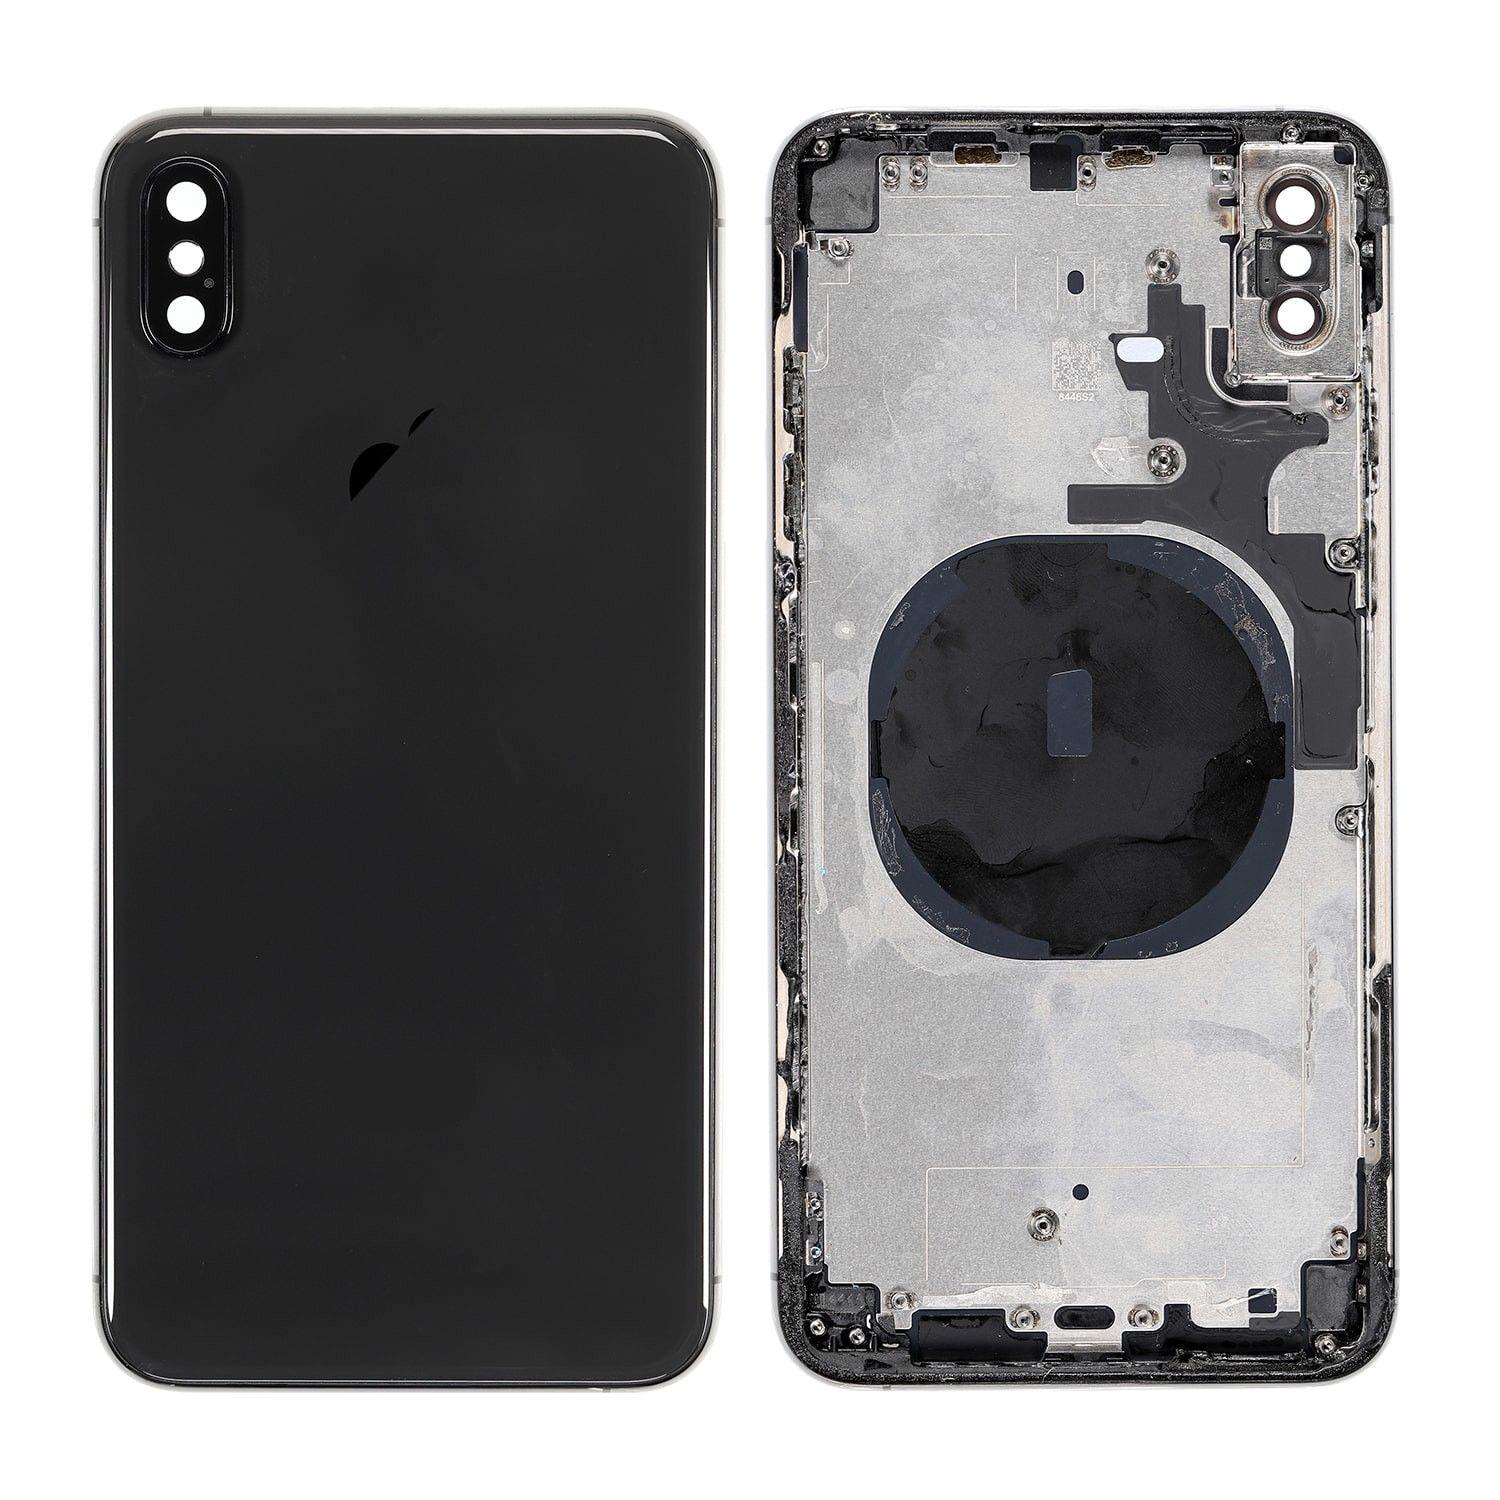 Body for iPhone Xs + back cover black